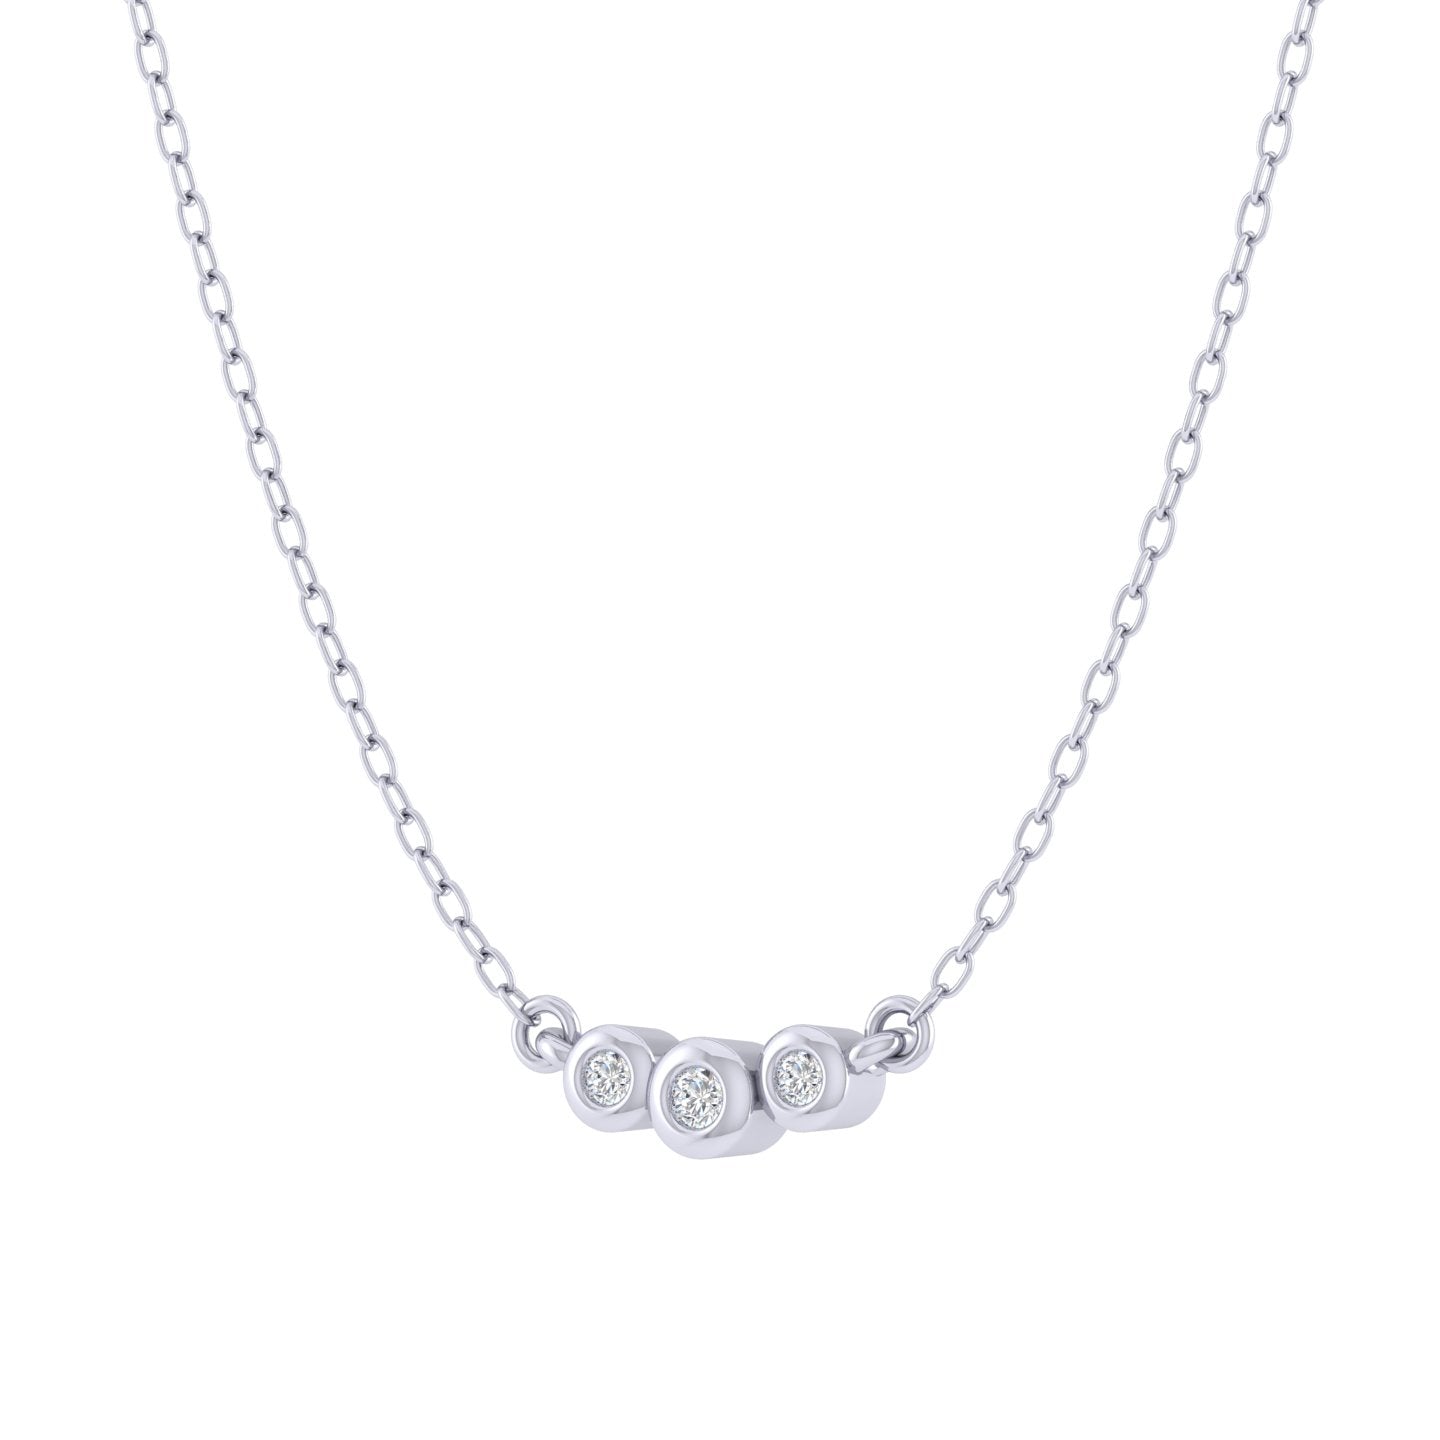 Three Stone 1/20 Cttw Natural Diamond Pendant Necklace set in 925 Sterling Silver